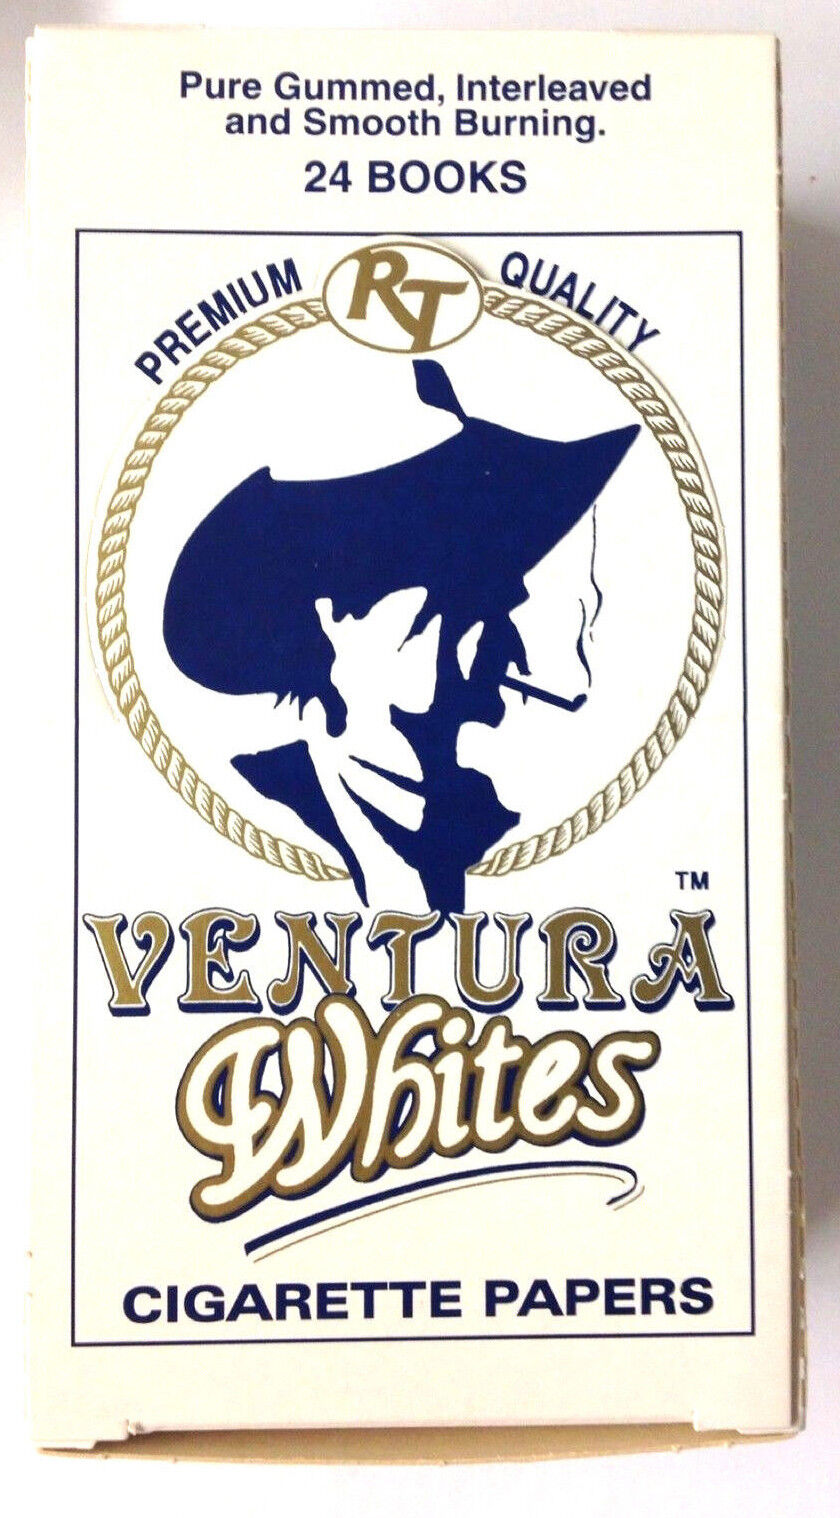 40 boxes of Ventura White cigarette rolling papers 960 booklets Pre-Priced $1.49